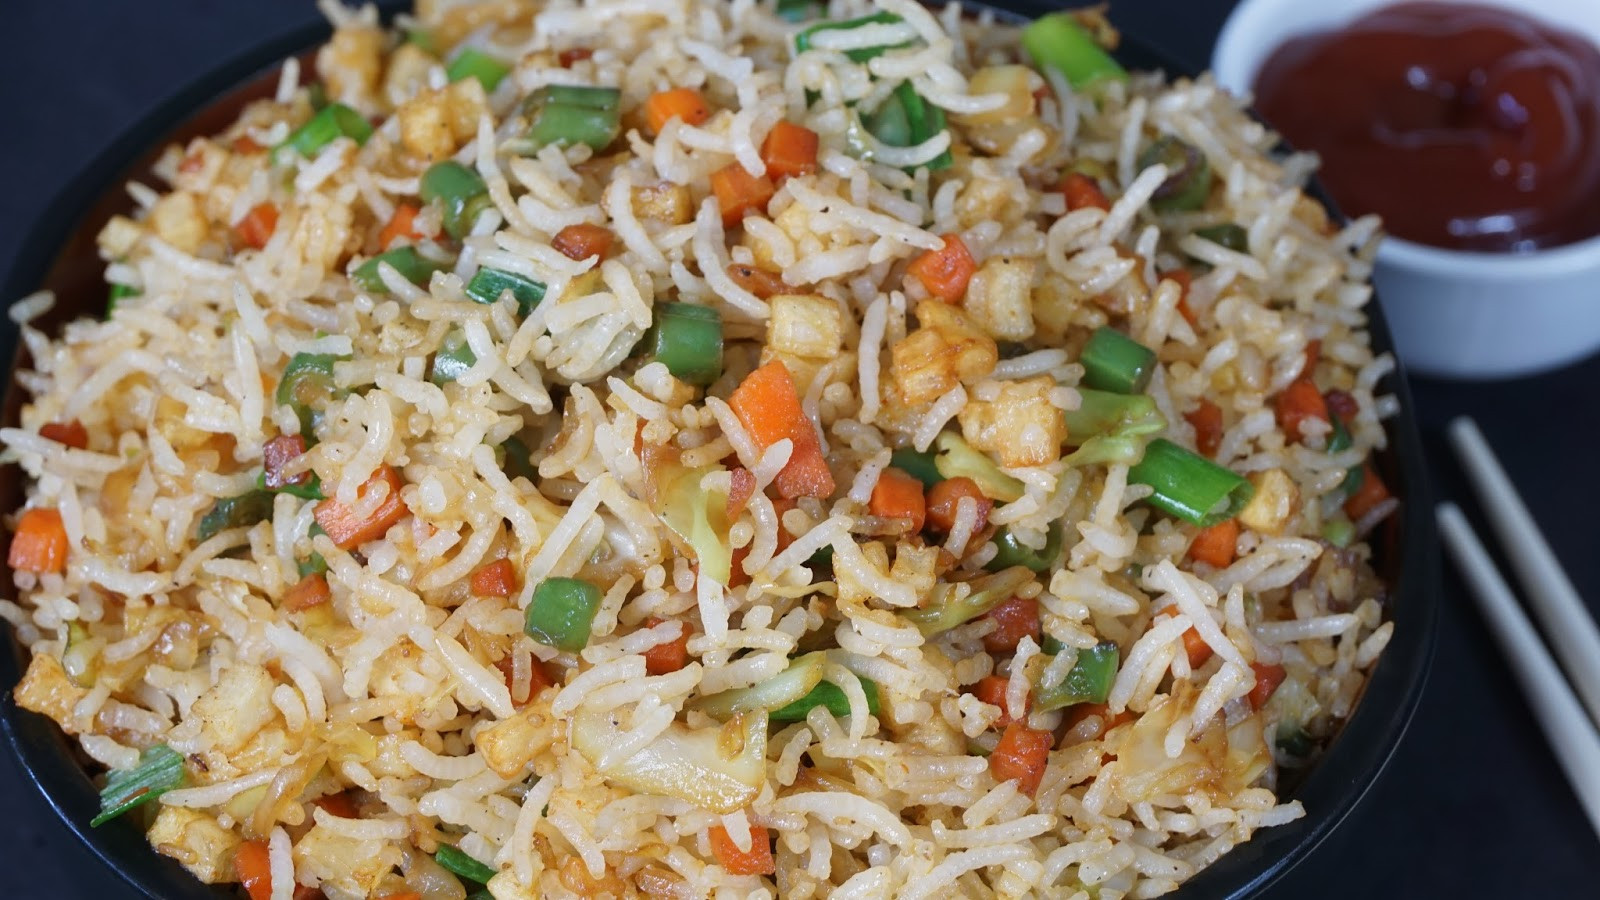 How Many Calories Are in Fried Rice?